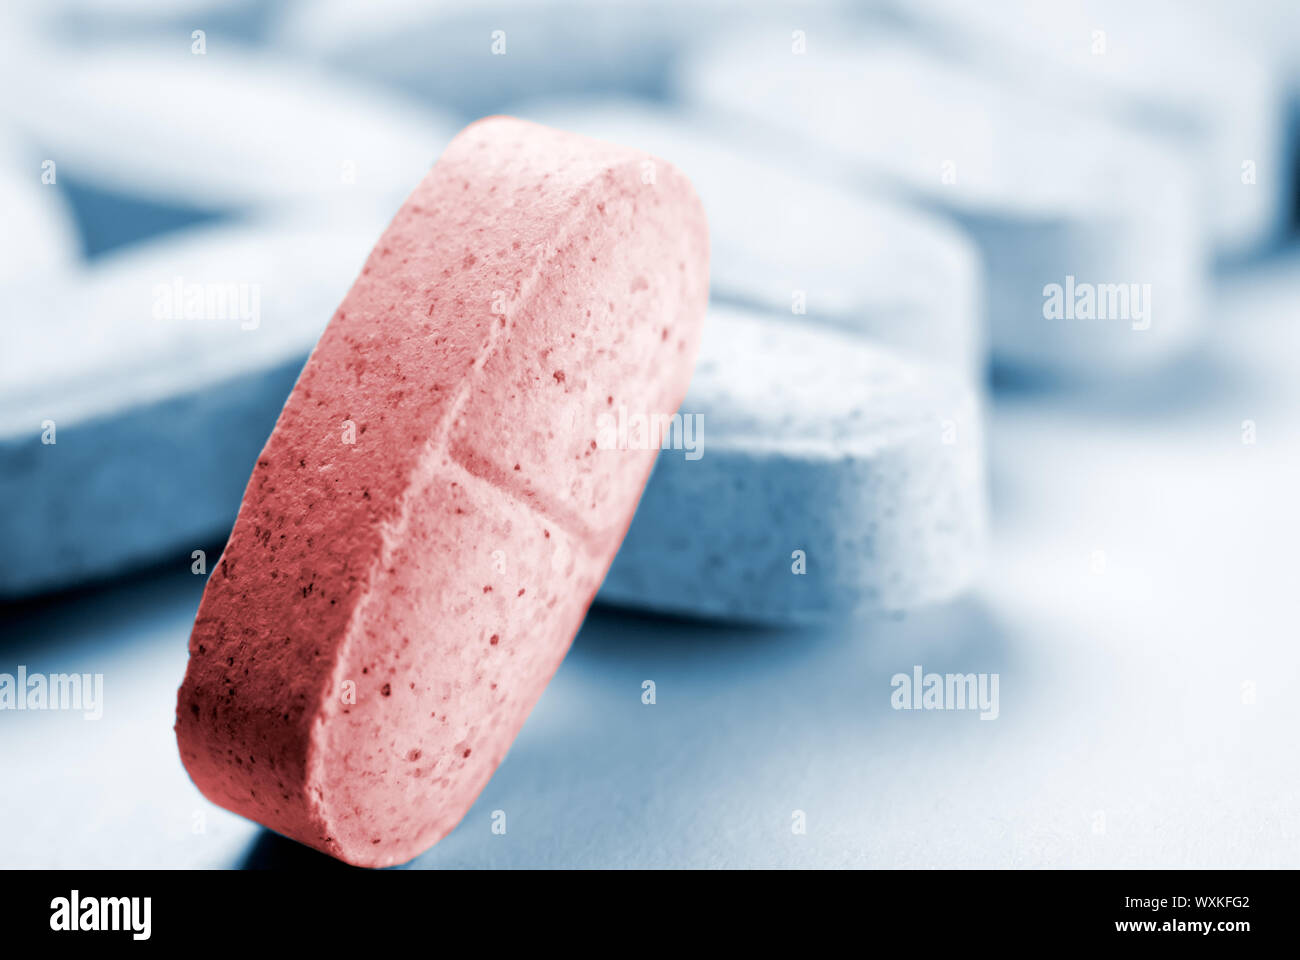 It is one pill stand out others. Stock Photo